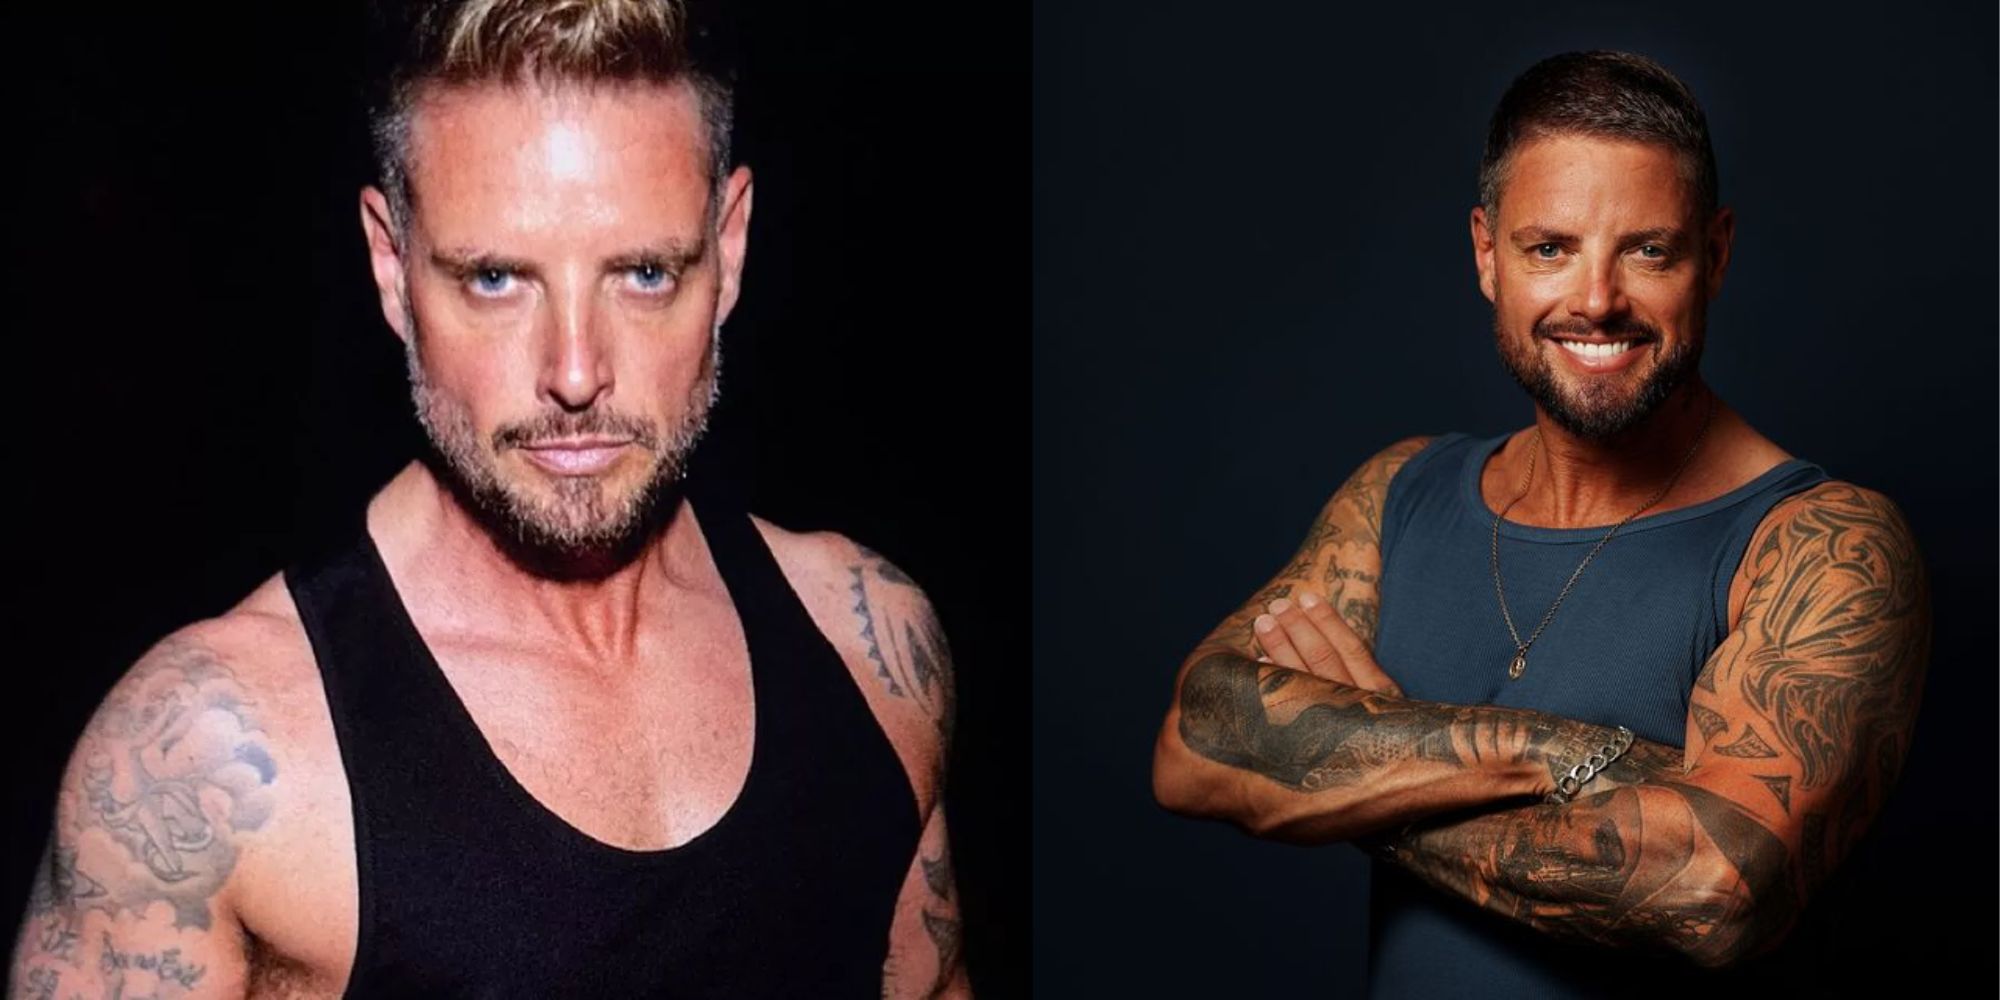 Keith Duffy Affair: Did He Breakup with Lisa Smith? Answered